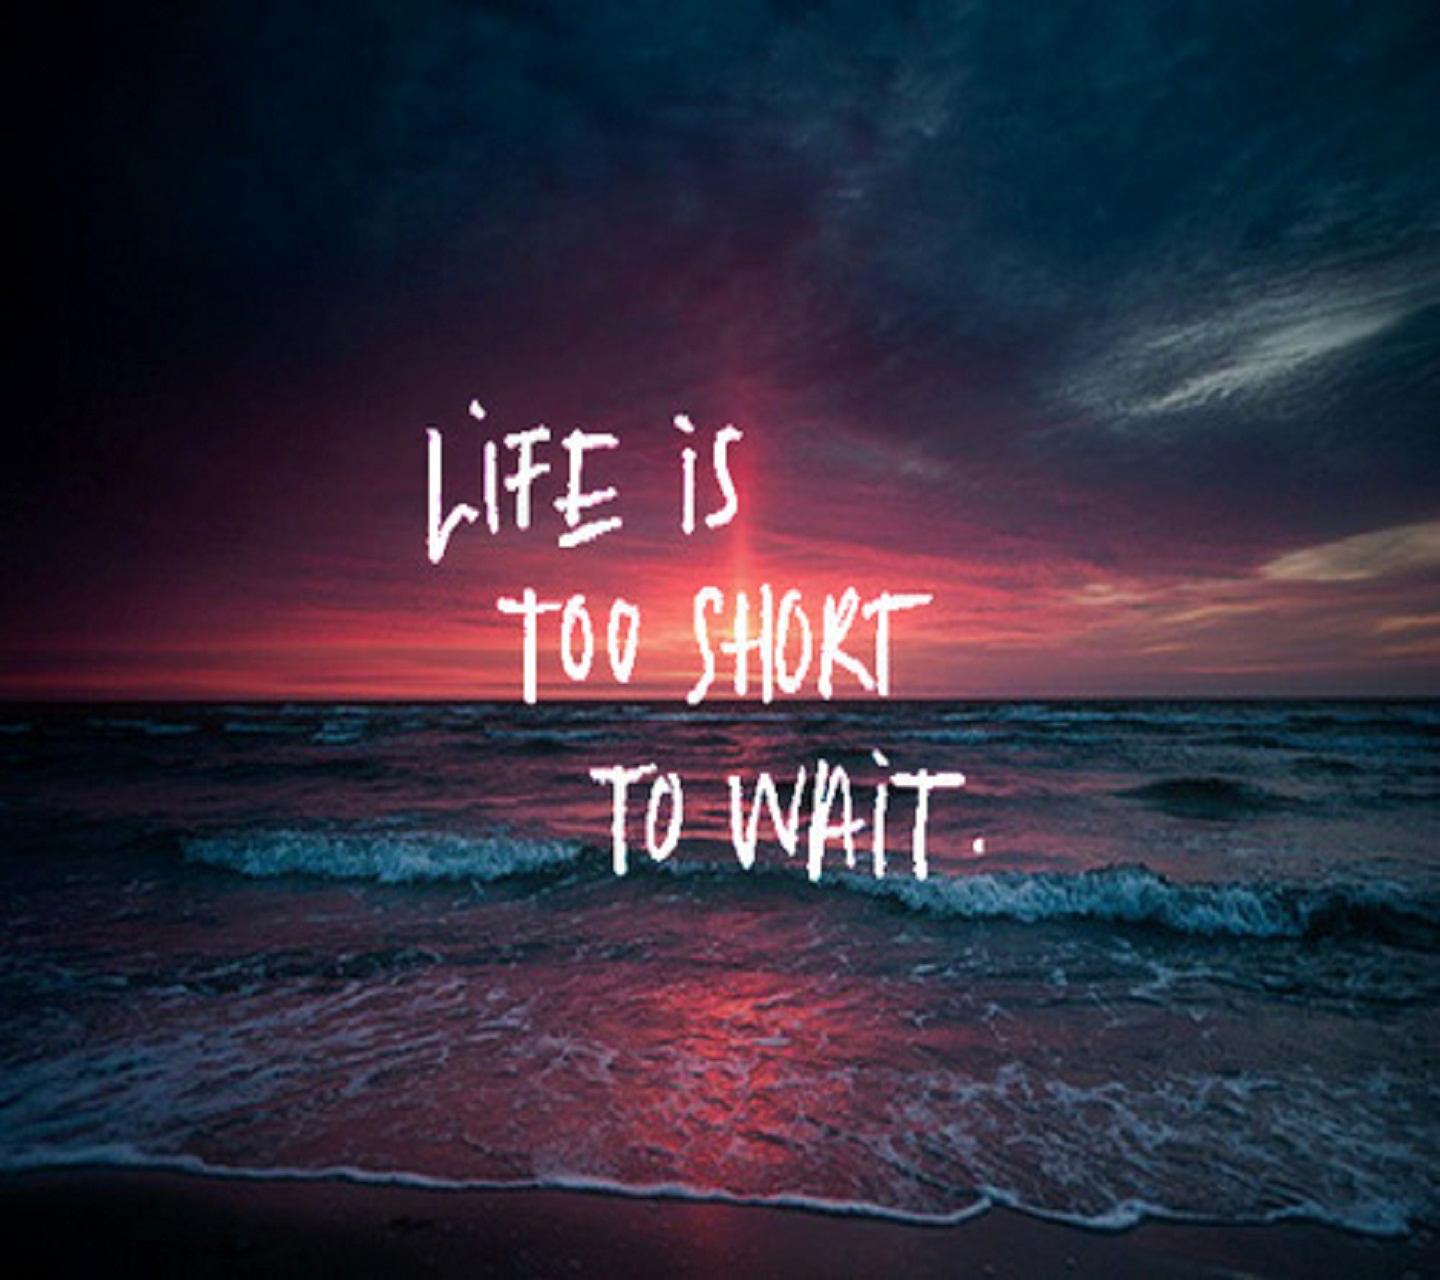 Download Life is too short hd wallpaper for laptop - Heart touching love  quote for your mobile cell phone